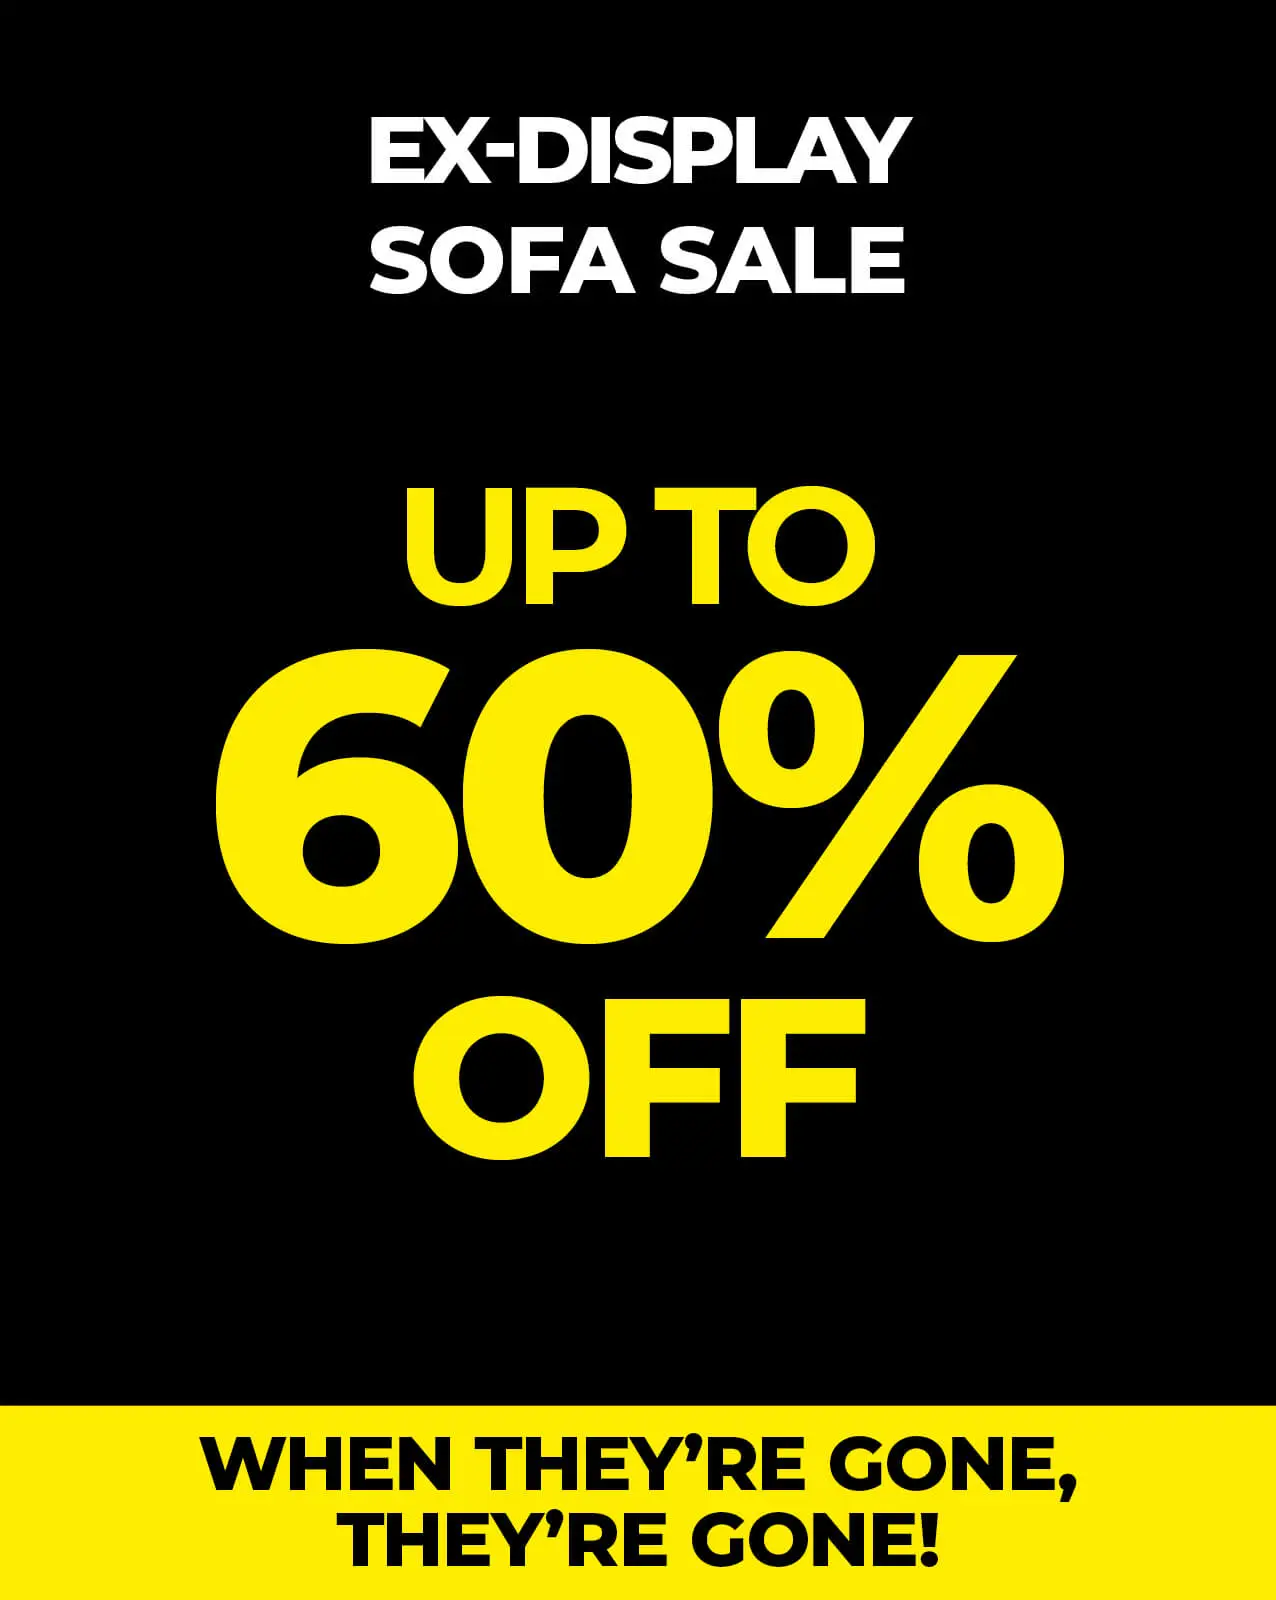 Ex display sofa sale, up to 60% off - when they're gone, they're gone!